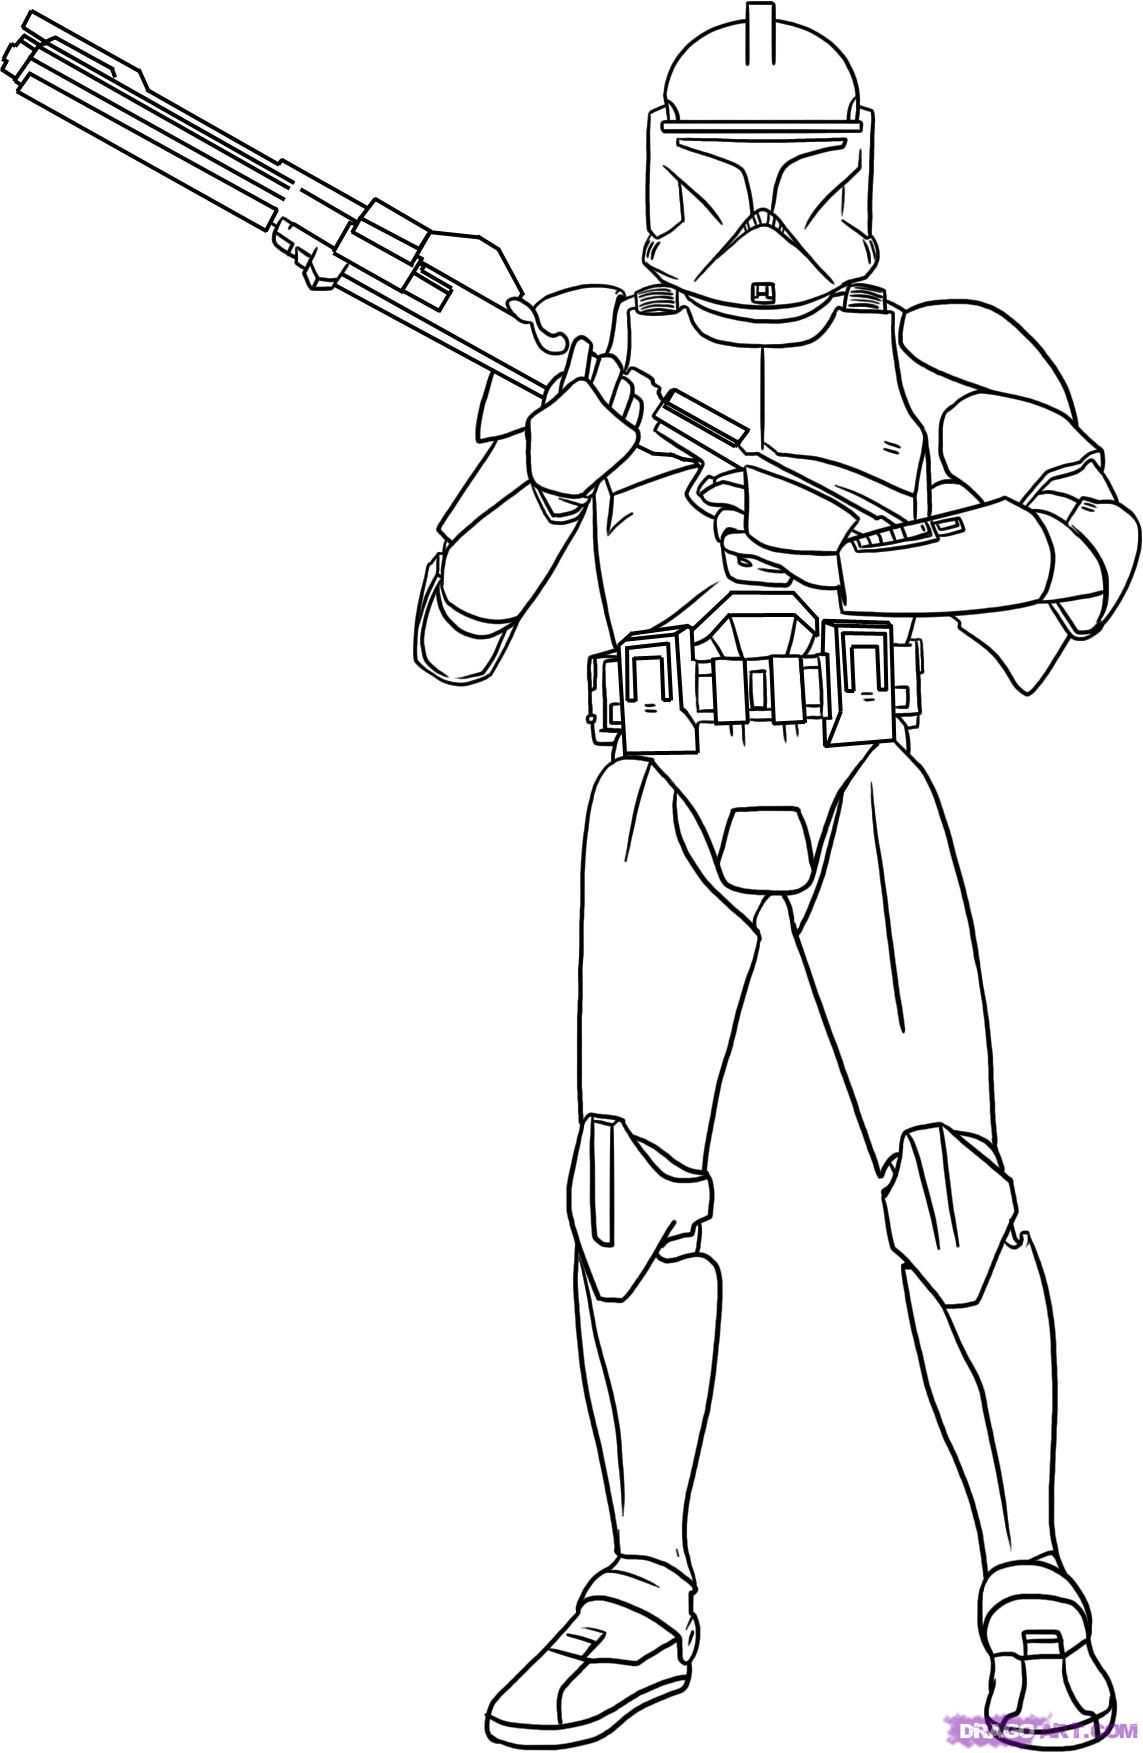 Star Wars Coloring Pages Free Printable Star Wars Coloring Pages Star Wars Drawings S